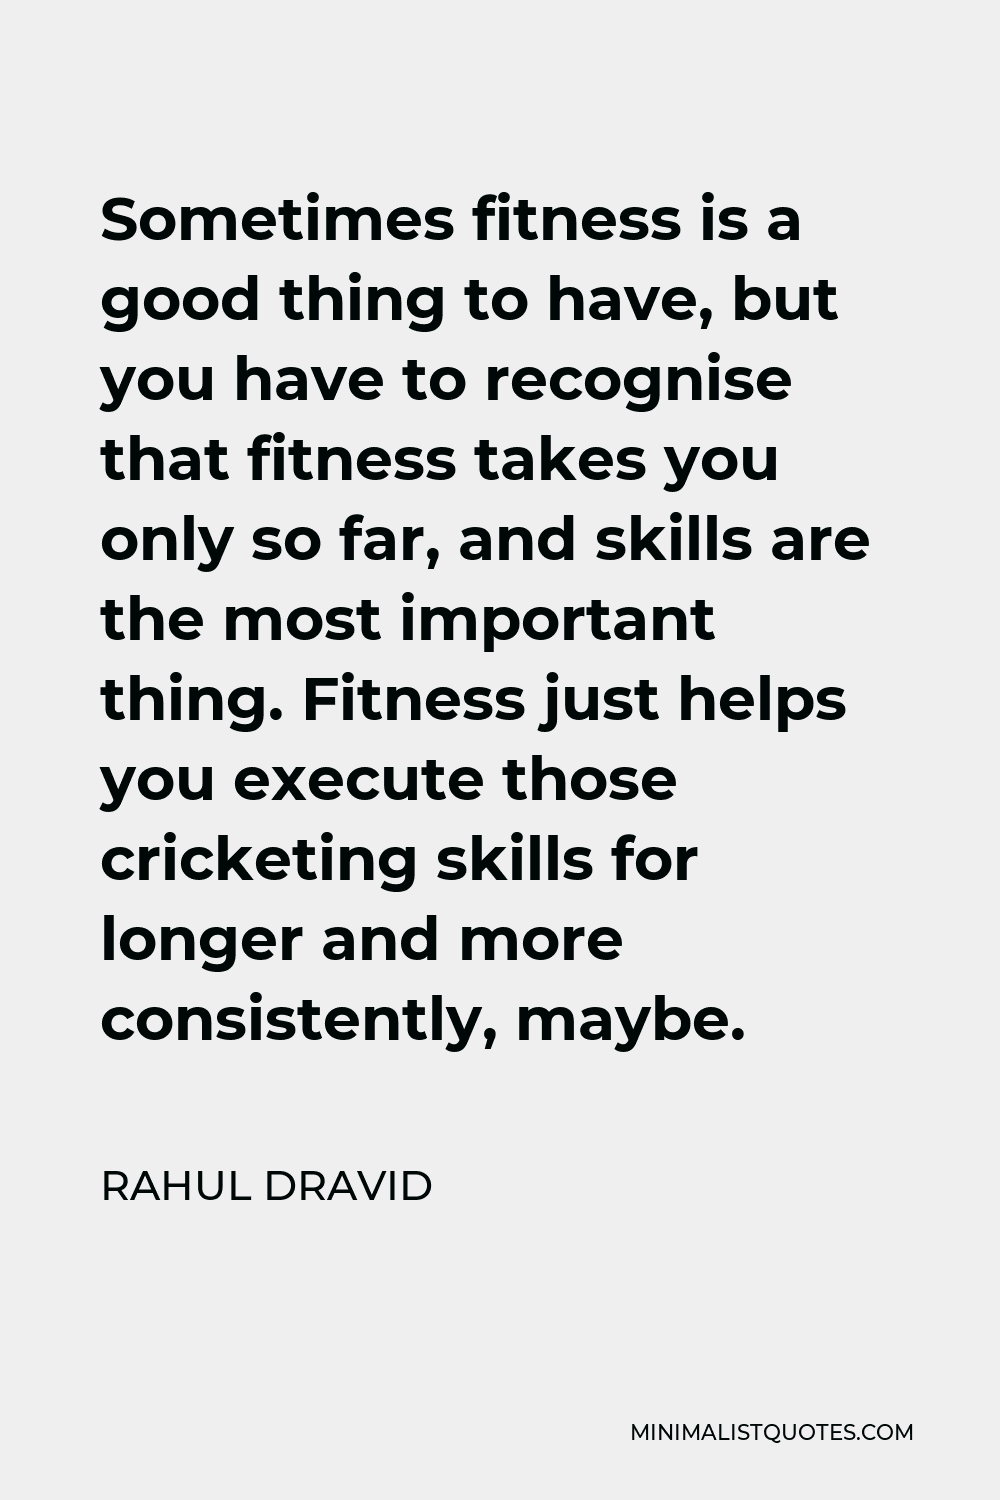 Rahul Dravid Quote - Sometimes fitness is a good thing to have, but you have to recognise that fitness takes you only so far, and skills are the most important thing. Fitness just helps you execute those cricketing skills for longer and more consistently, maybe.